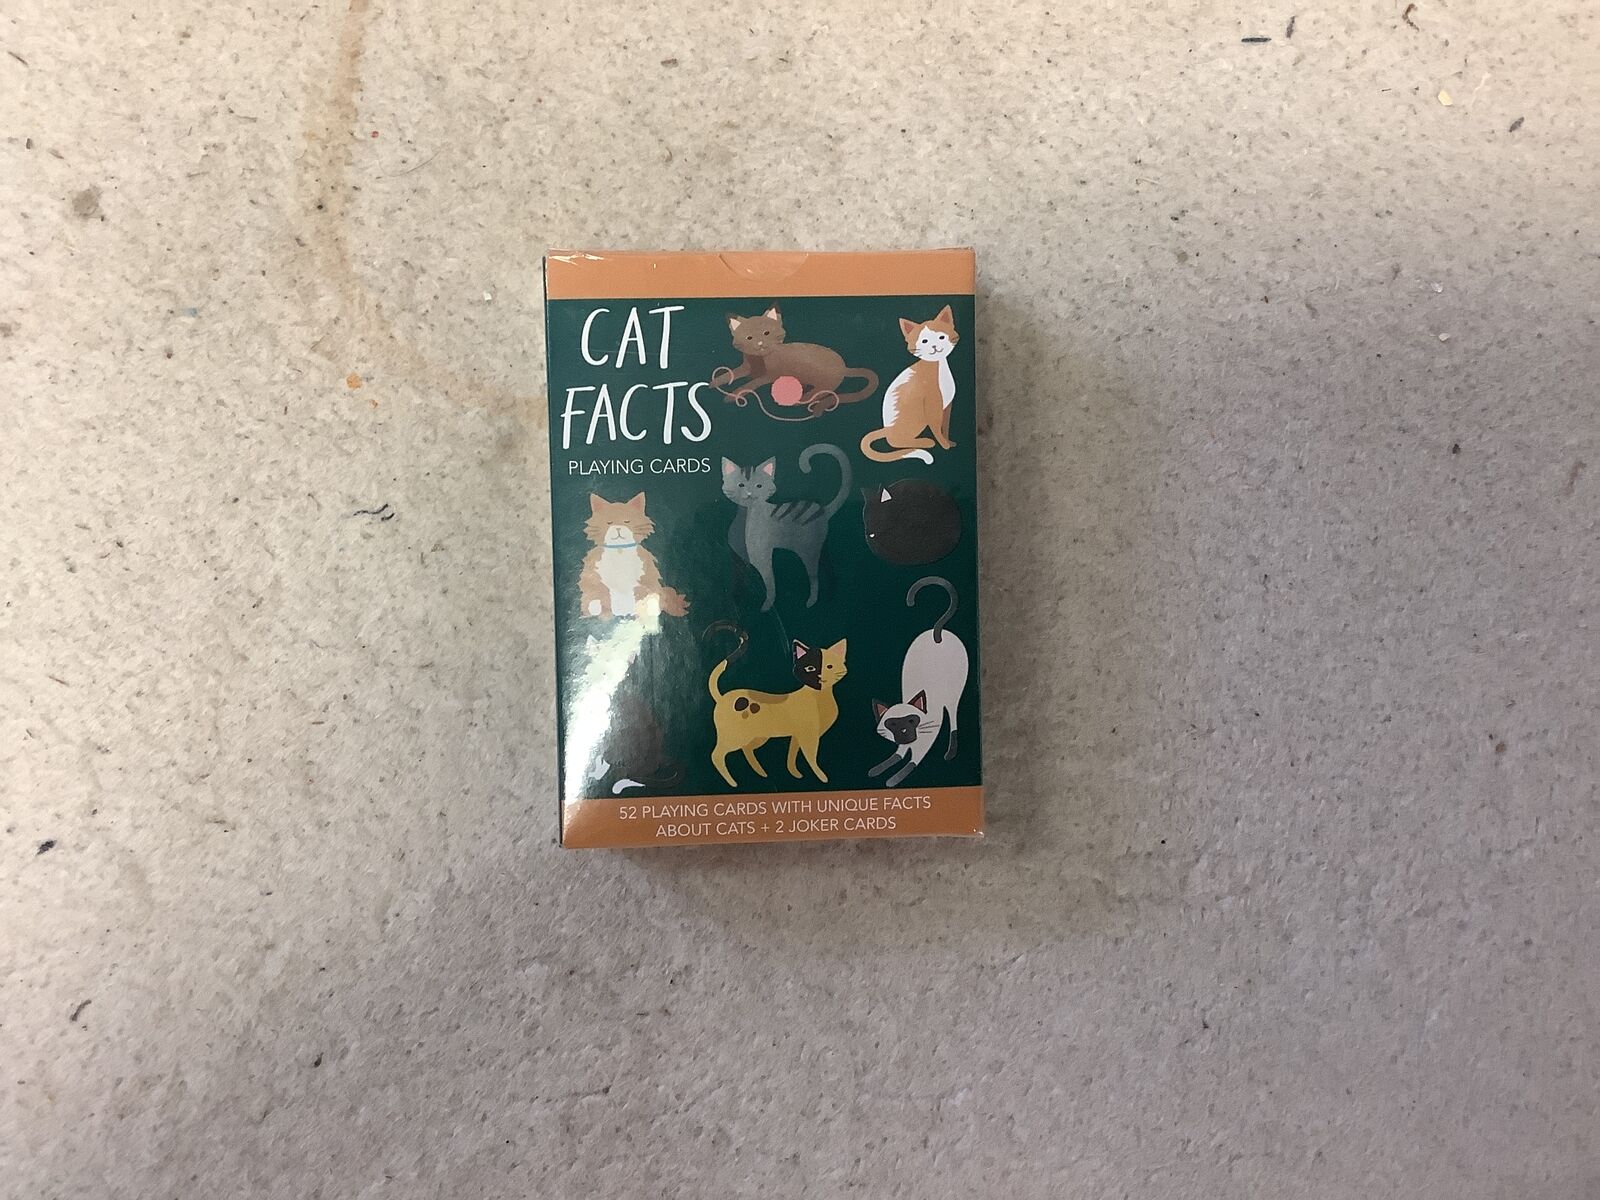 Cat facts playing cards